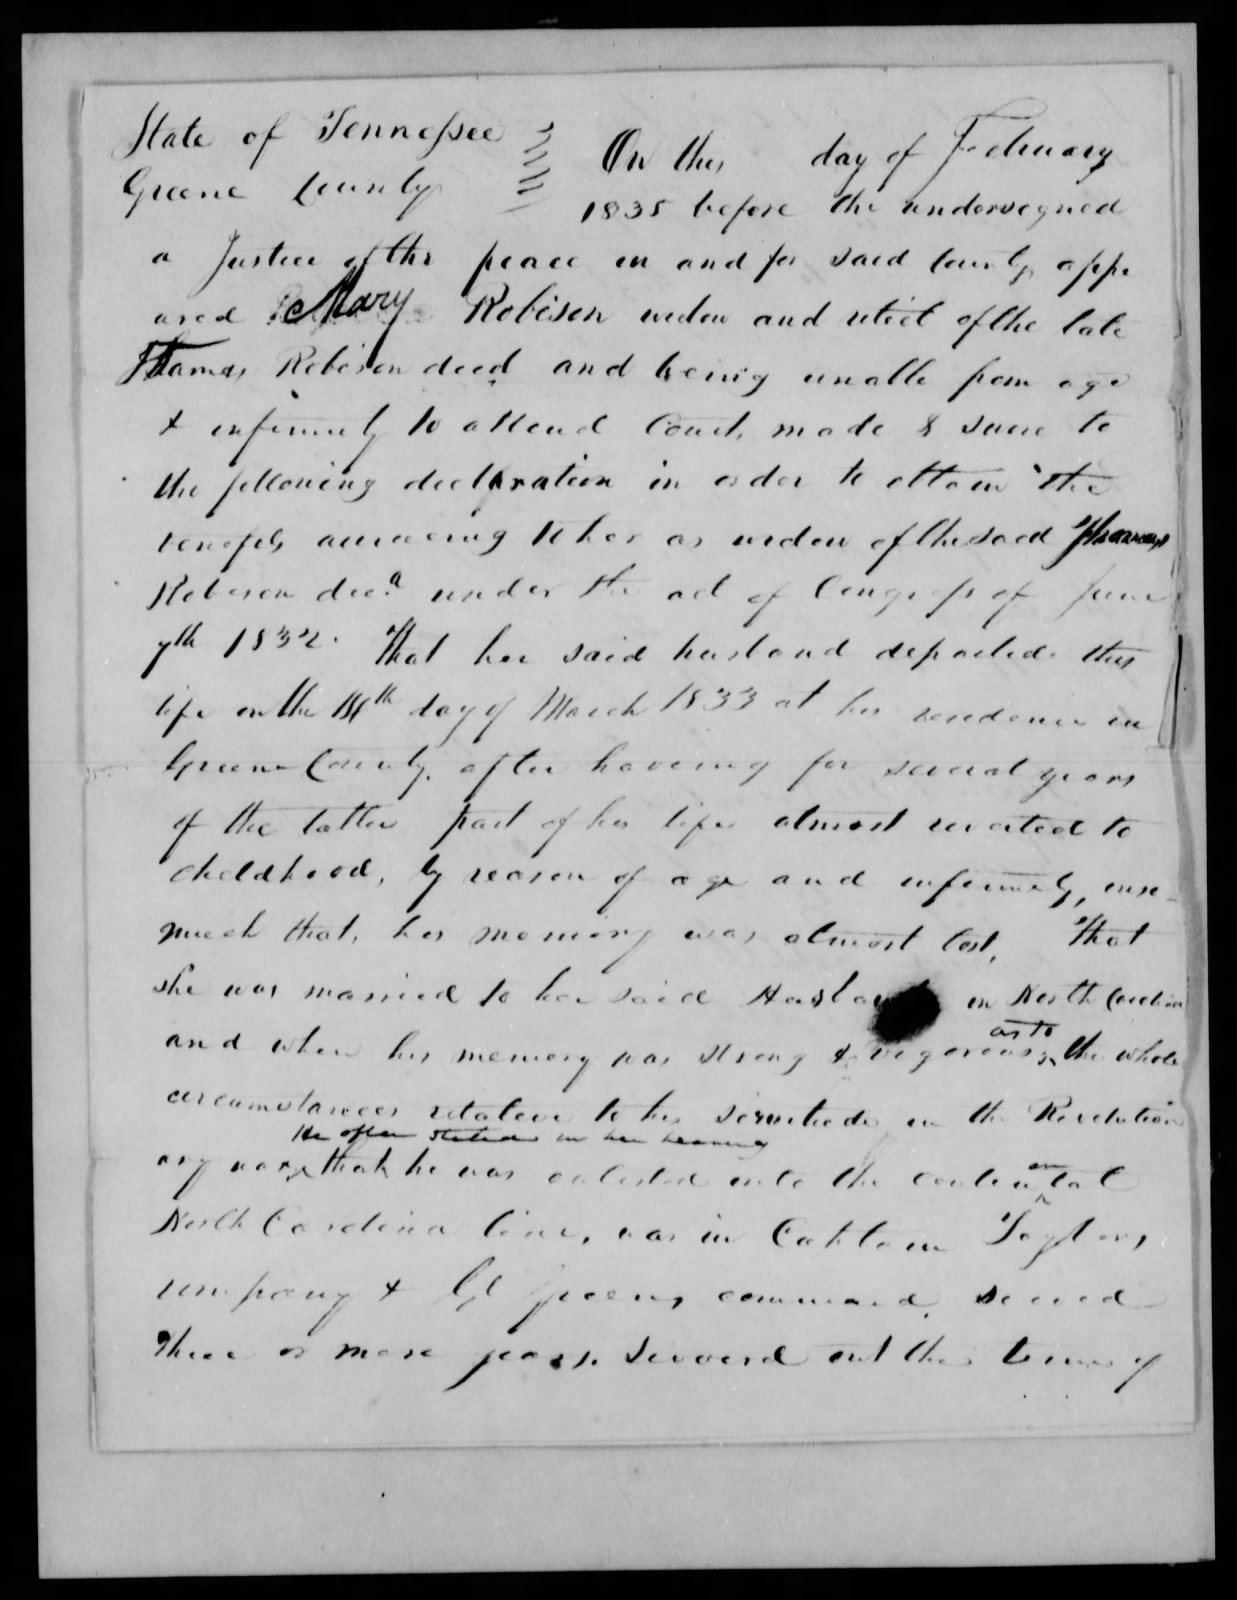 Application for a Widow's Pension from Mary Robison, February 1835, page 1